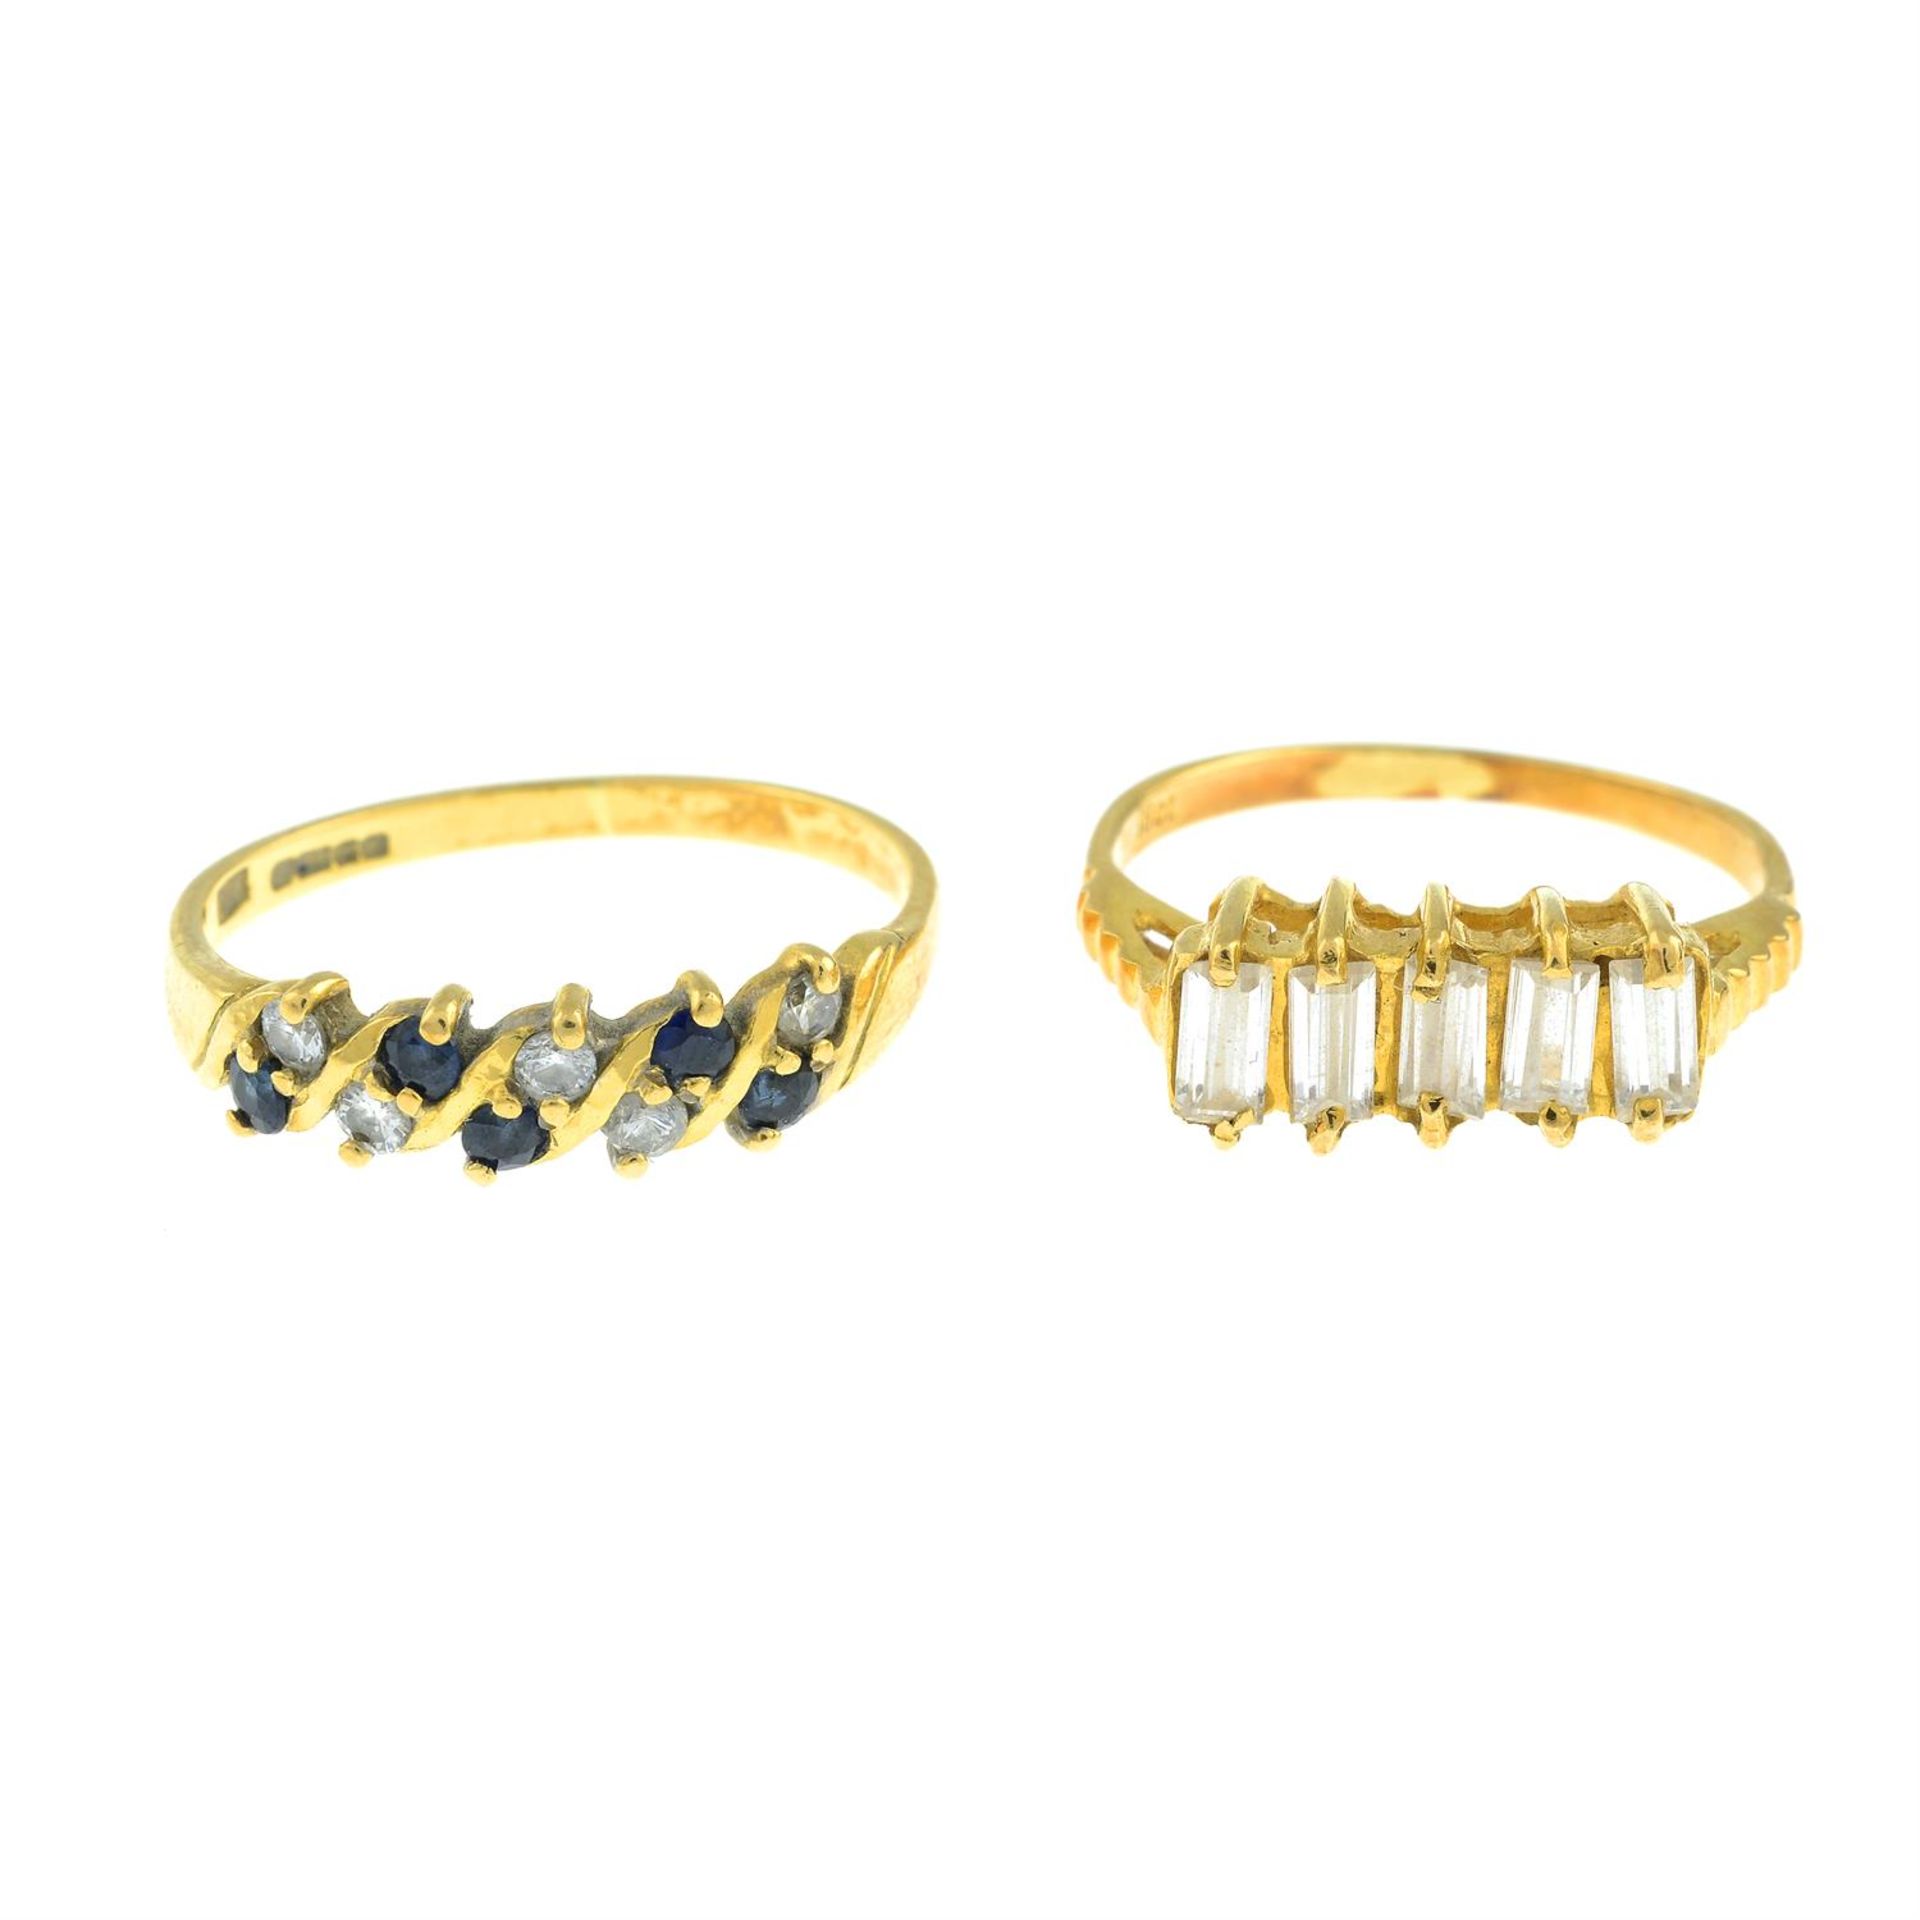 An 18ct gold sapphire and diamond ring and a colourless gem five-stone ring.